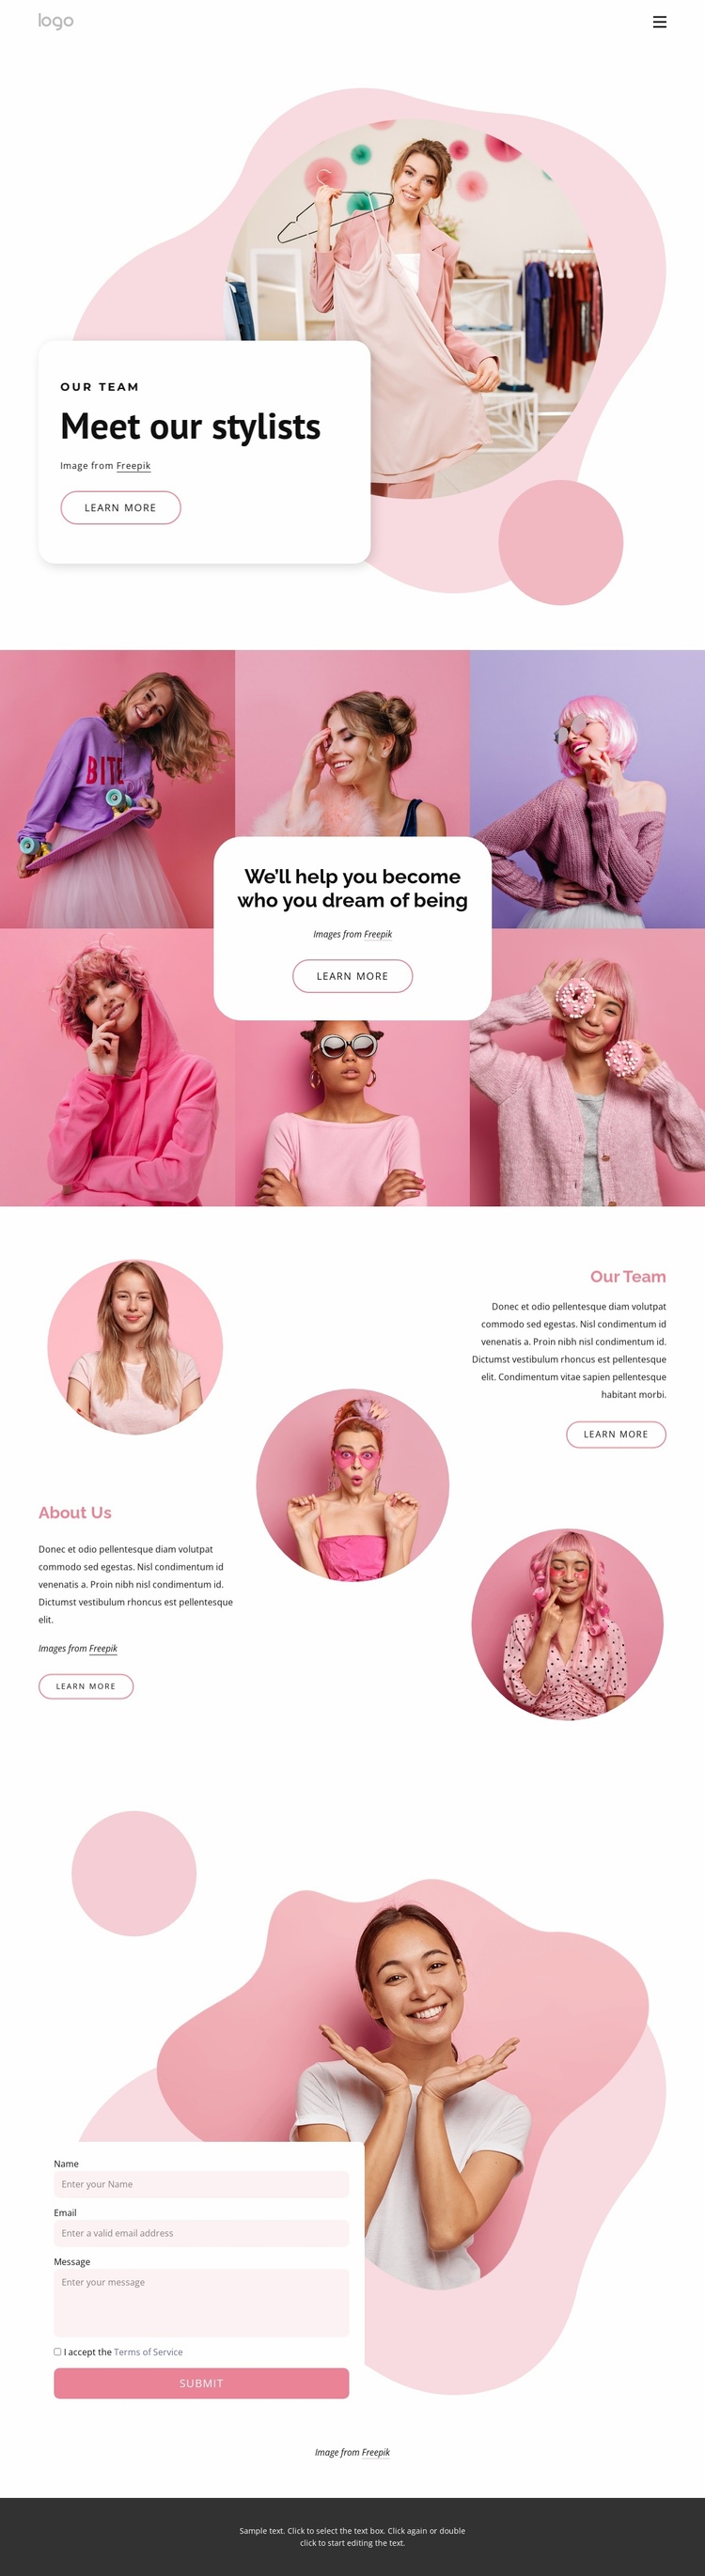 Meet our stylists Ecommerce Website Design